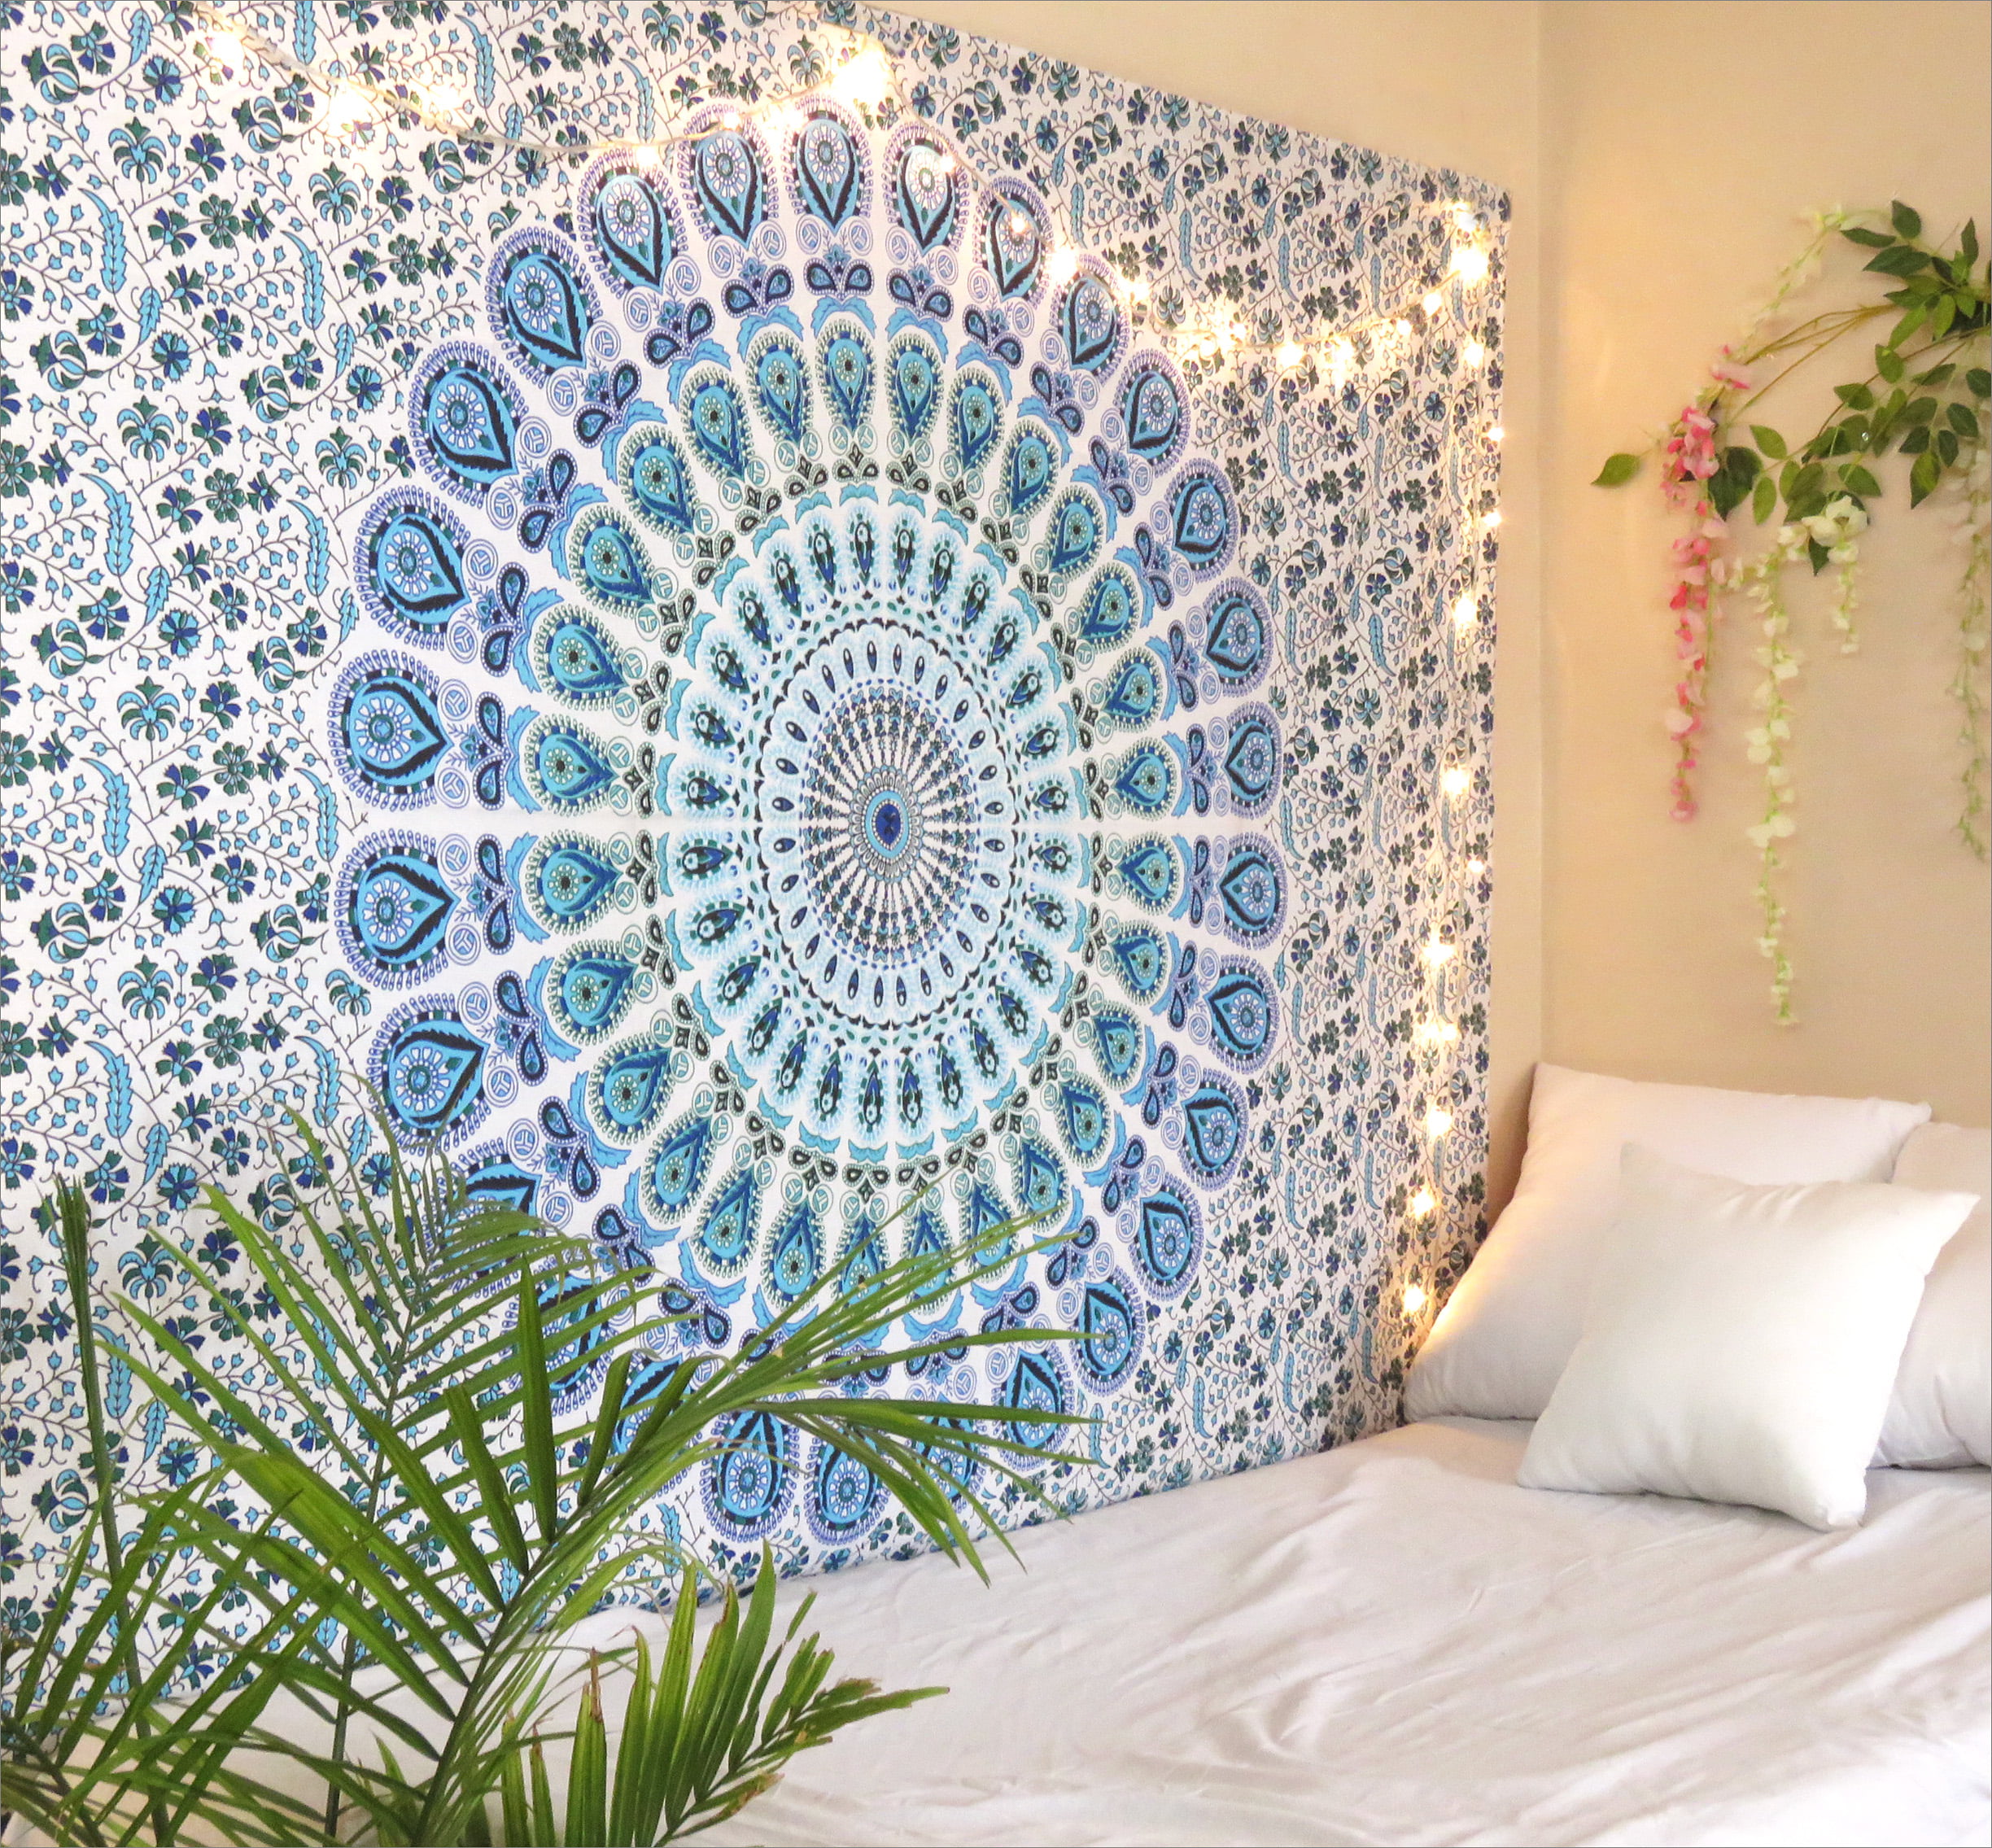 Indian Mandala Peacock Style Wall Hanging Tapestry Twin Size Bedspread Cotton 